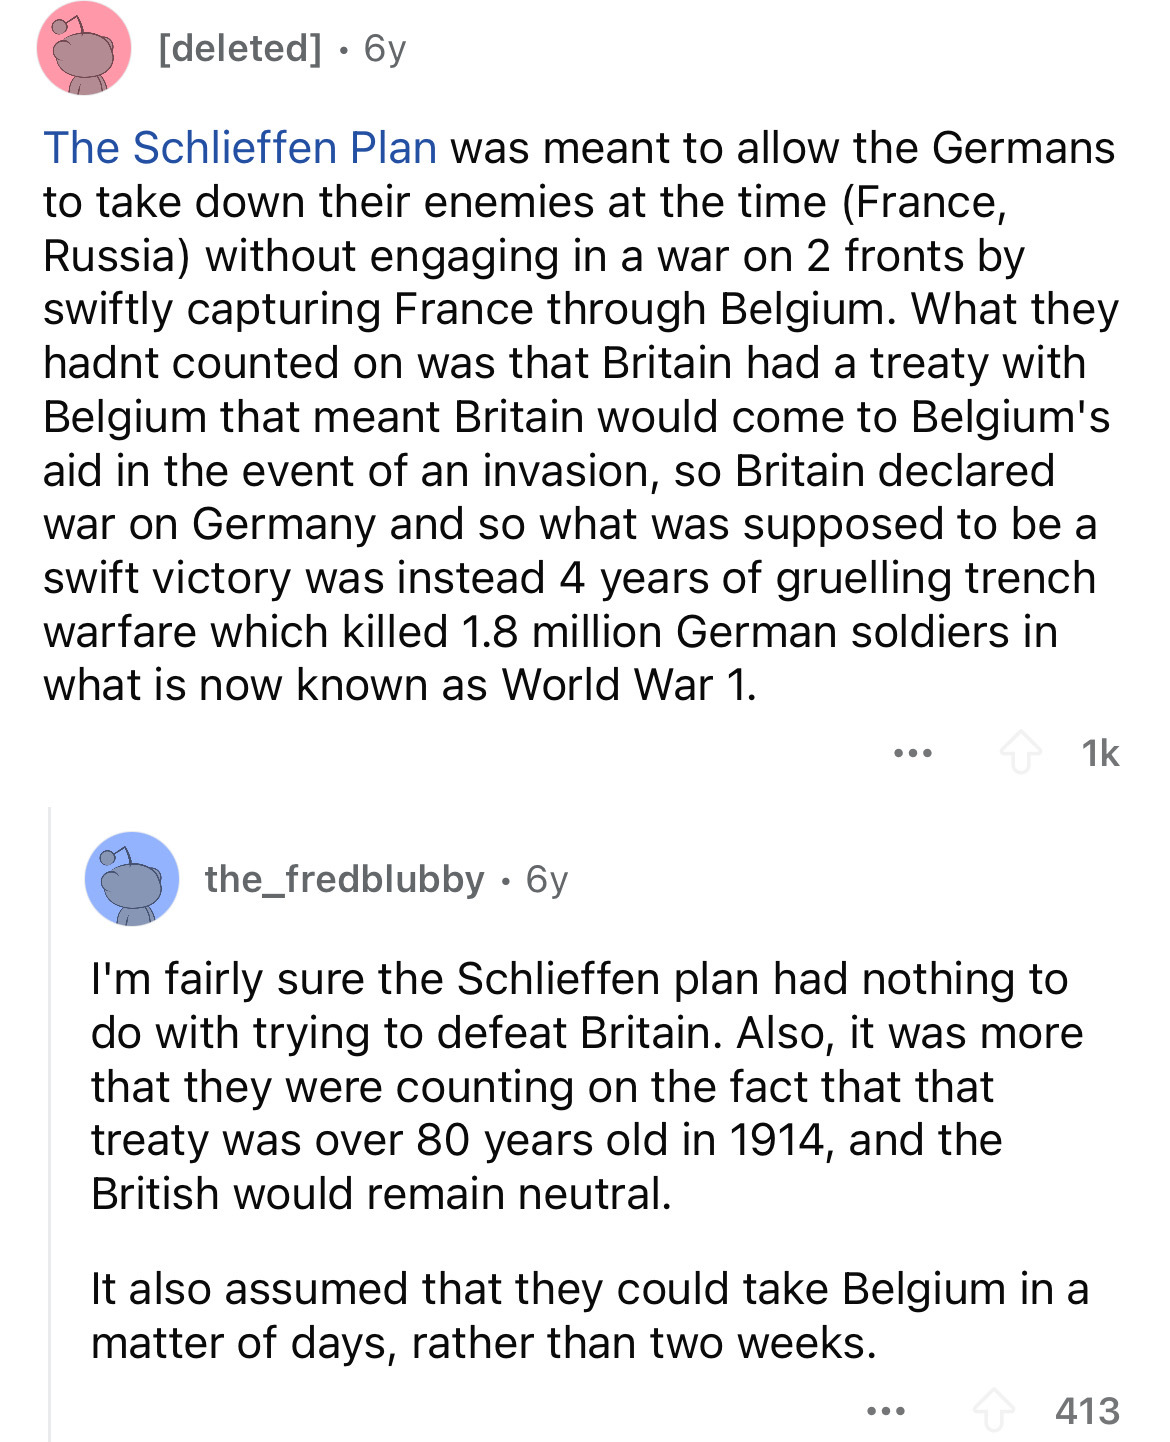 document - deleted 6y The Schlieffen Plan was meant to allow the Germans to take down their enemies at the time France, Russia without engaging in a war on 2 fronts by swiftly capturing France through Belgium. What they hadnt counted on was that Britain h